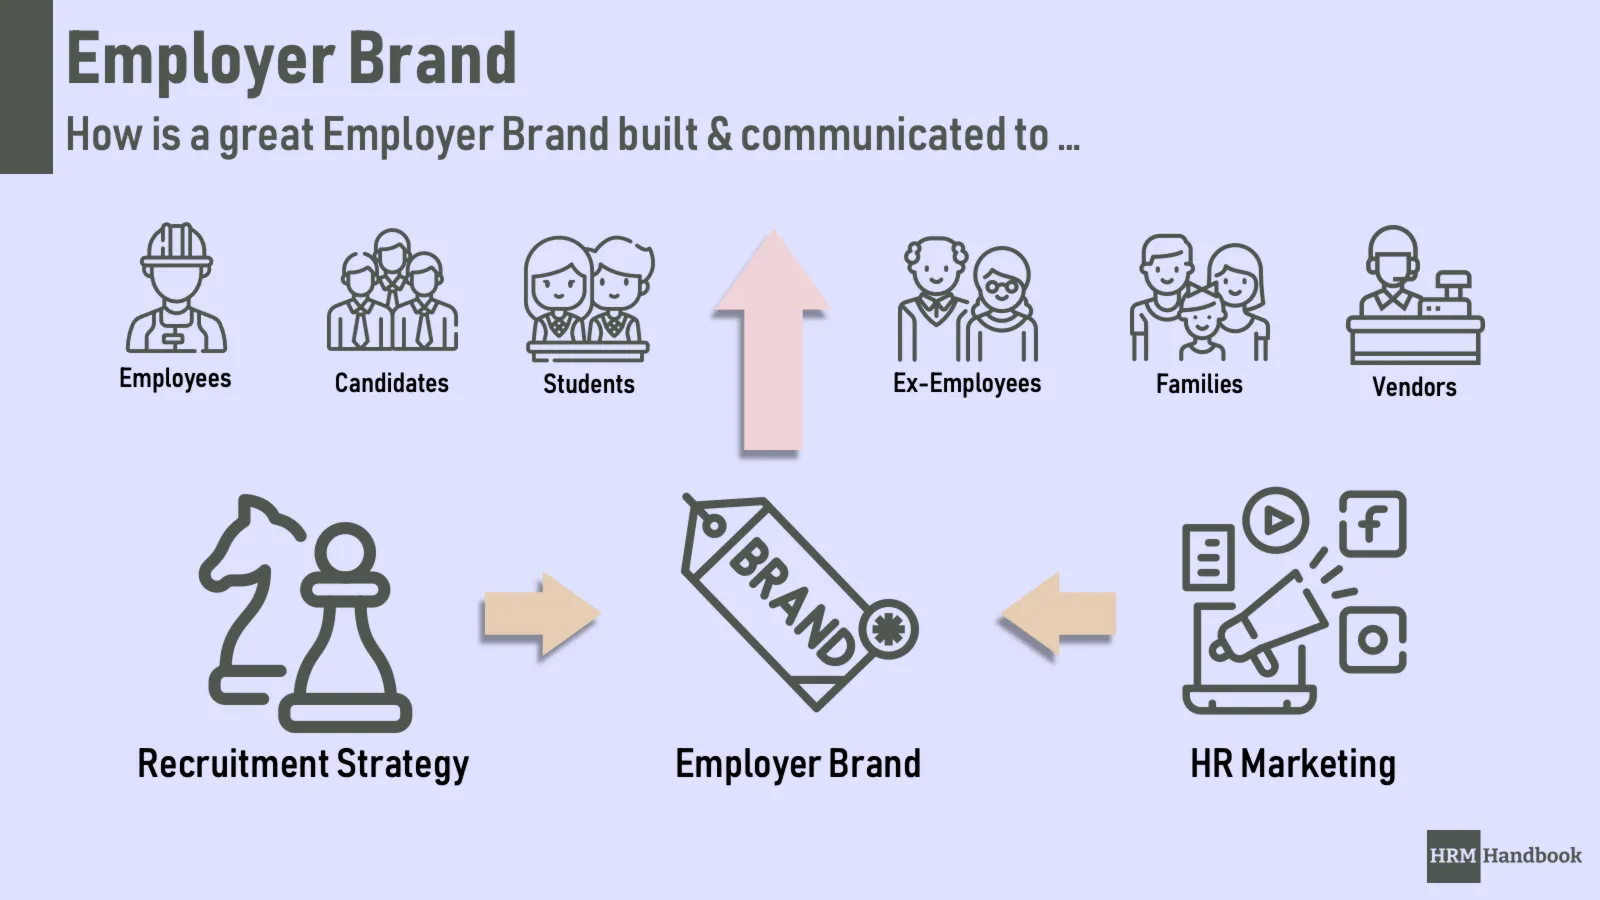 Building a great Employer Brand and Communicating It